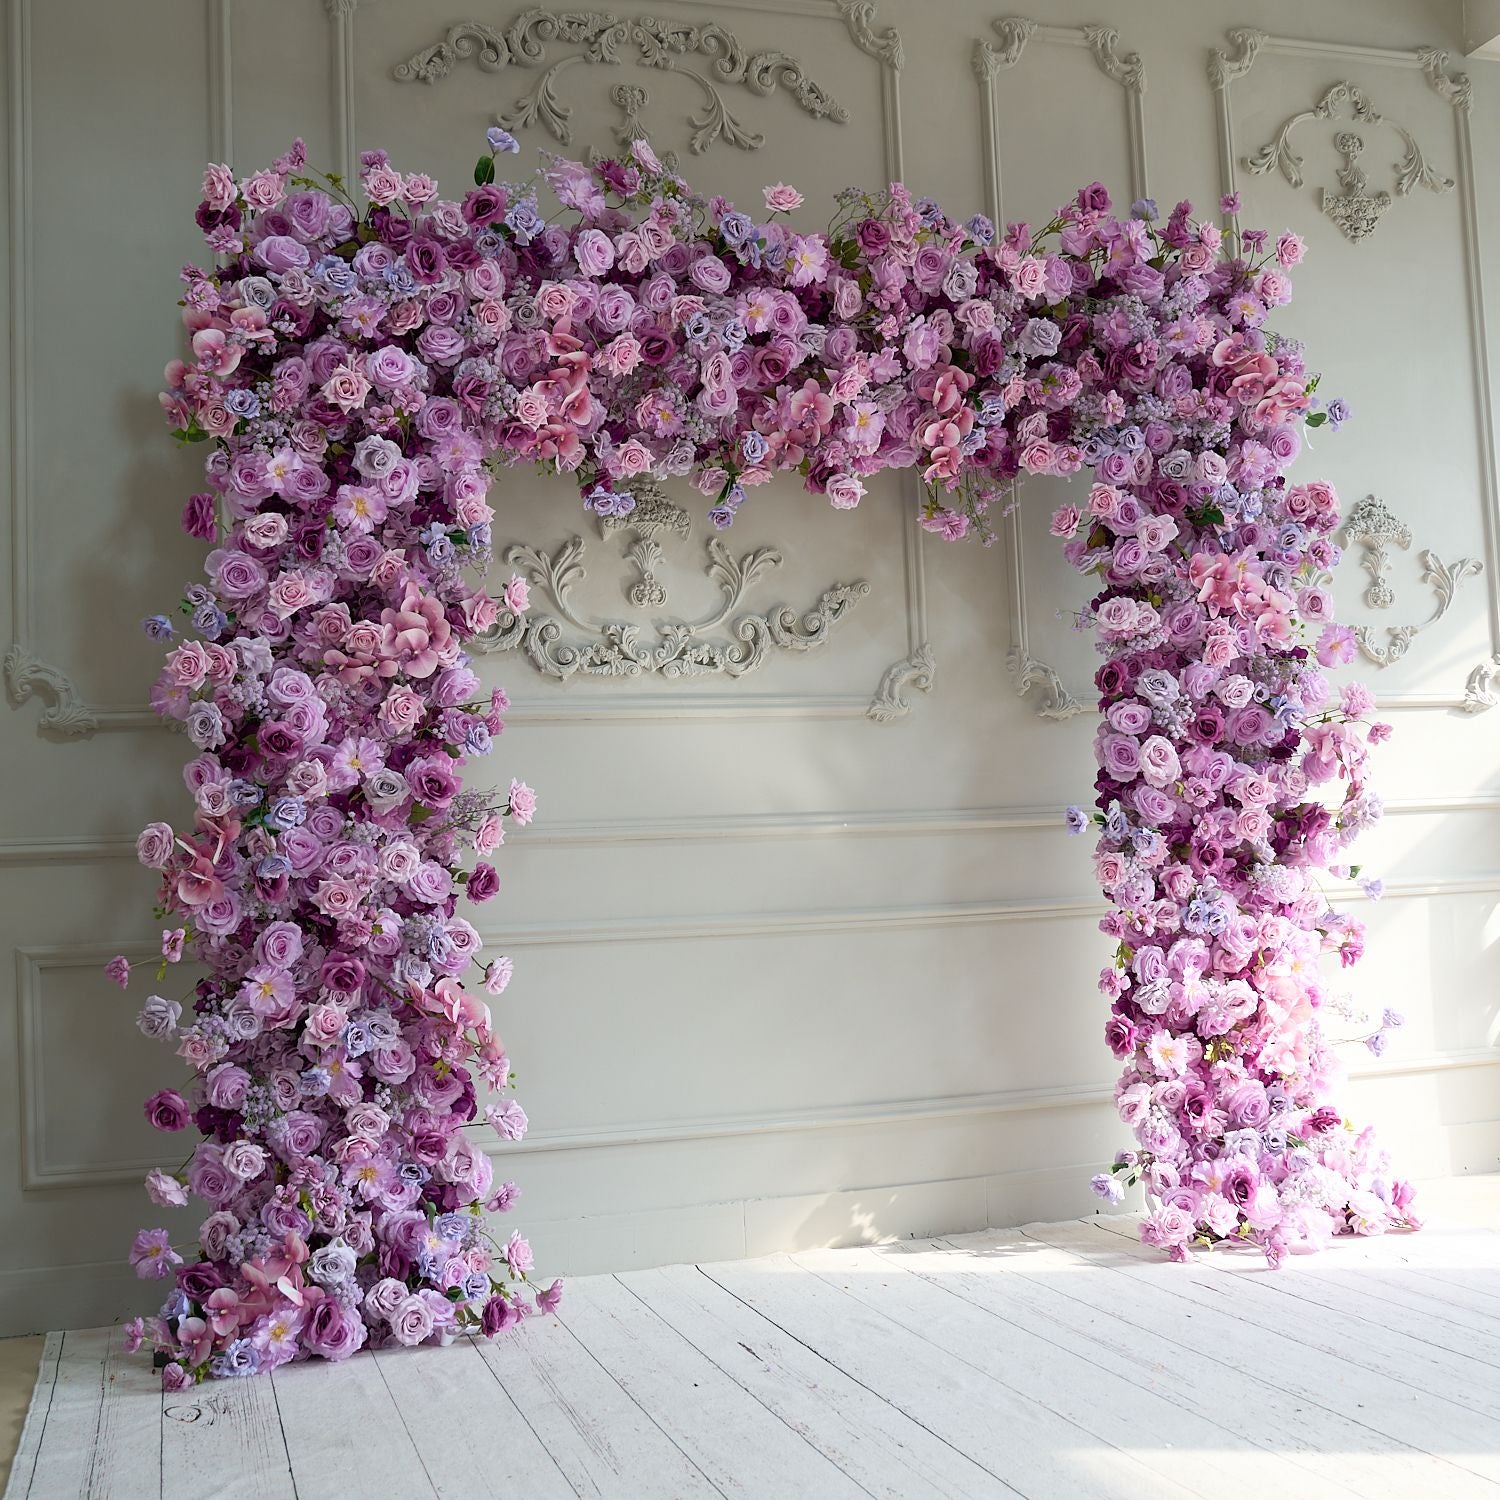 Flower Arch 8x8ft Purple Roses Florals Set Fabric Backdrop Flower Wall Proposal Wedding Party Decor